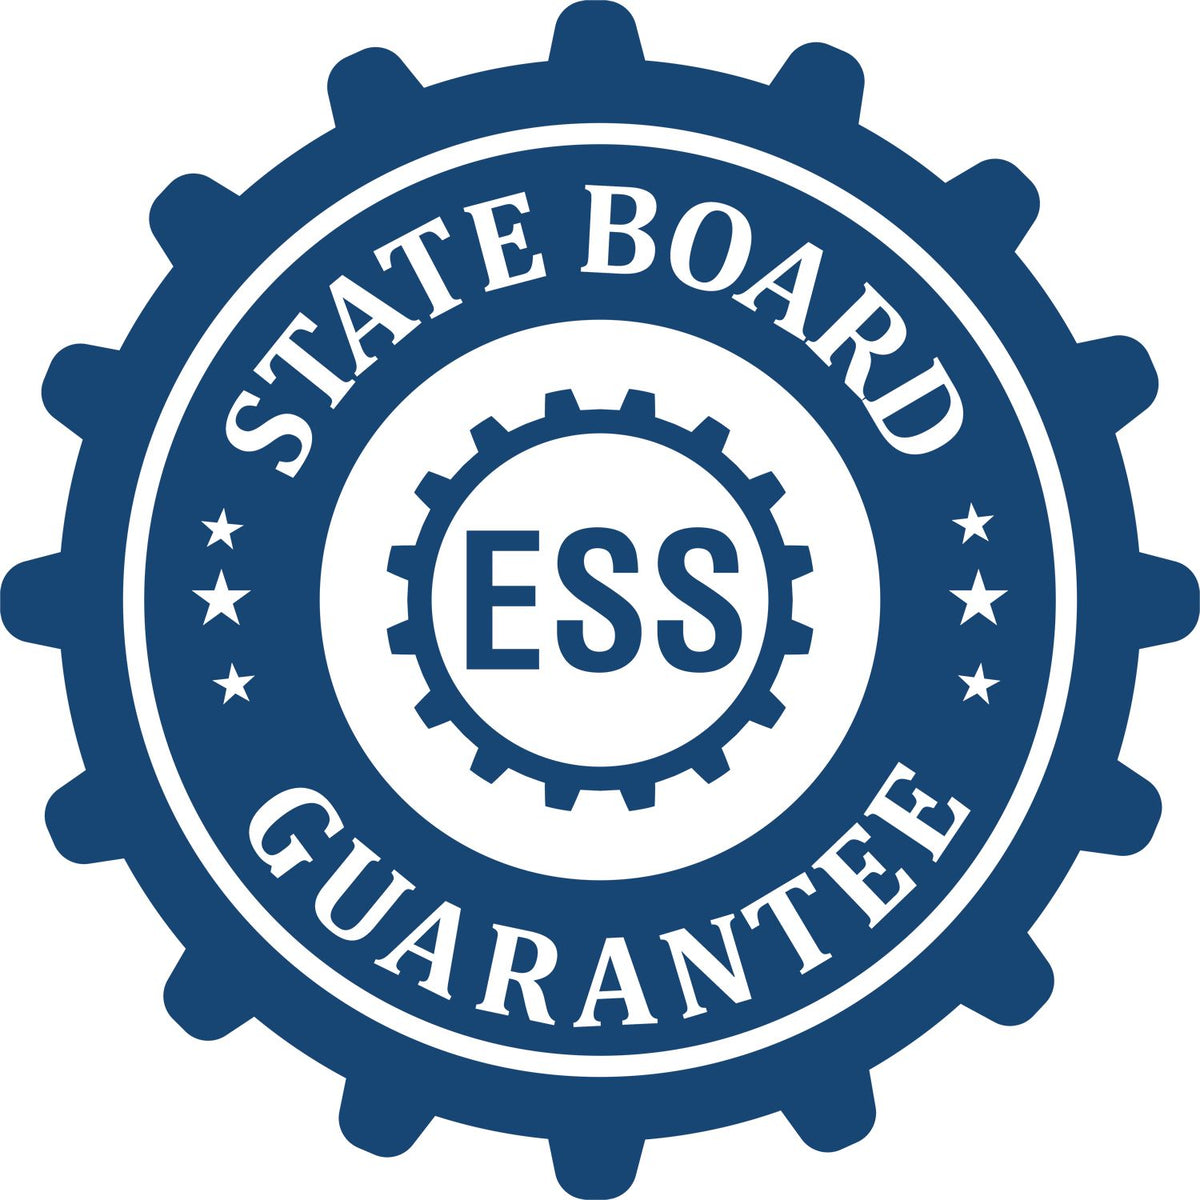 An emblem in a gear shape illustrating a state board guarantee for the Gift Rhode Island Land Surveyor Seal